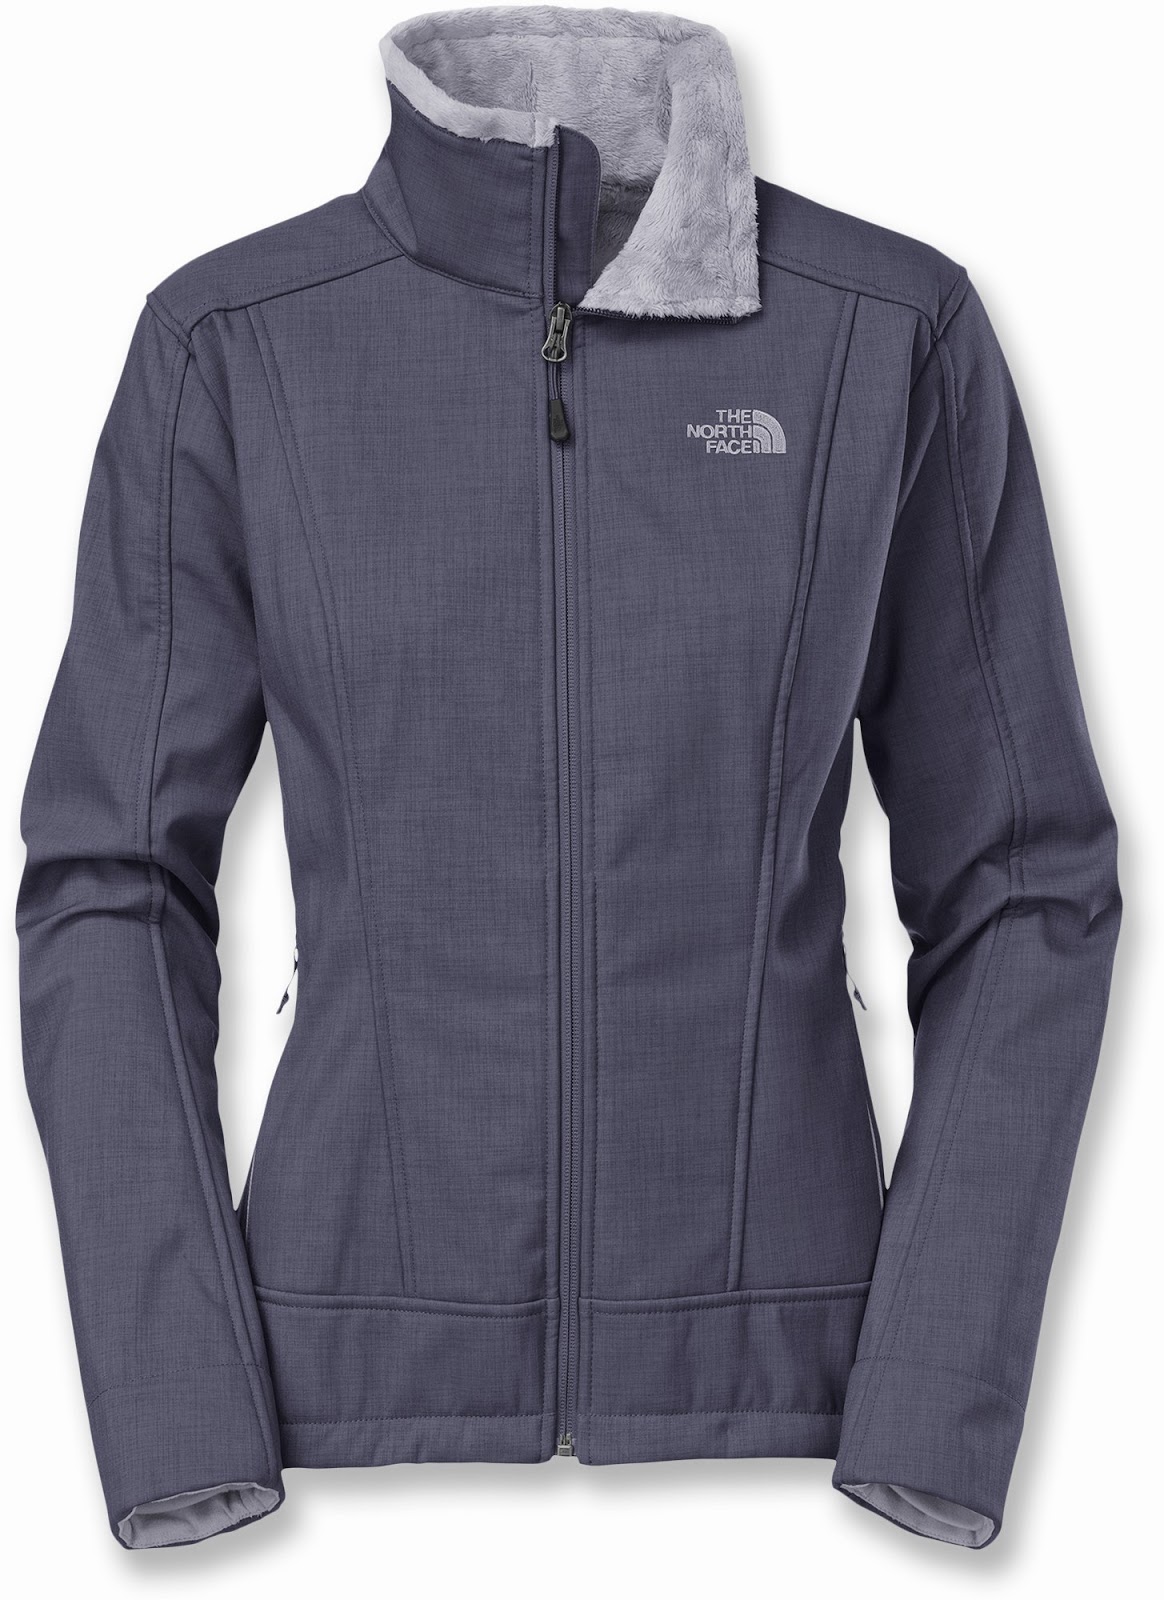 The North Face Chromium Thermal Soft-Shell Jacket $79.73 (Retail $160 ...